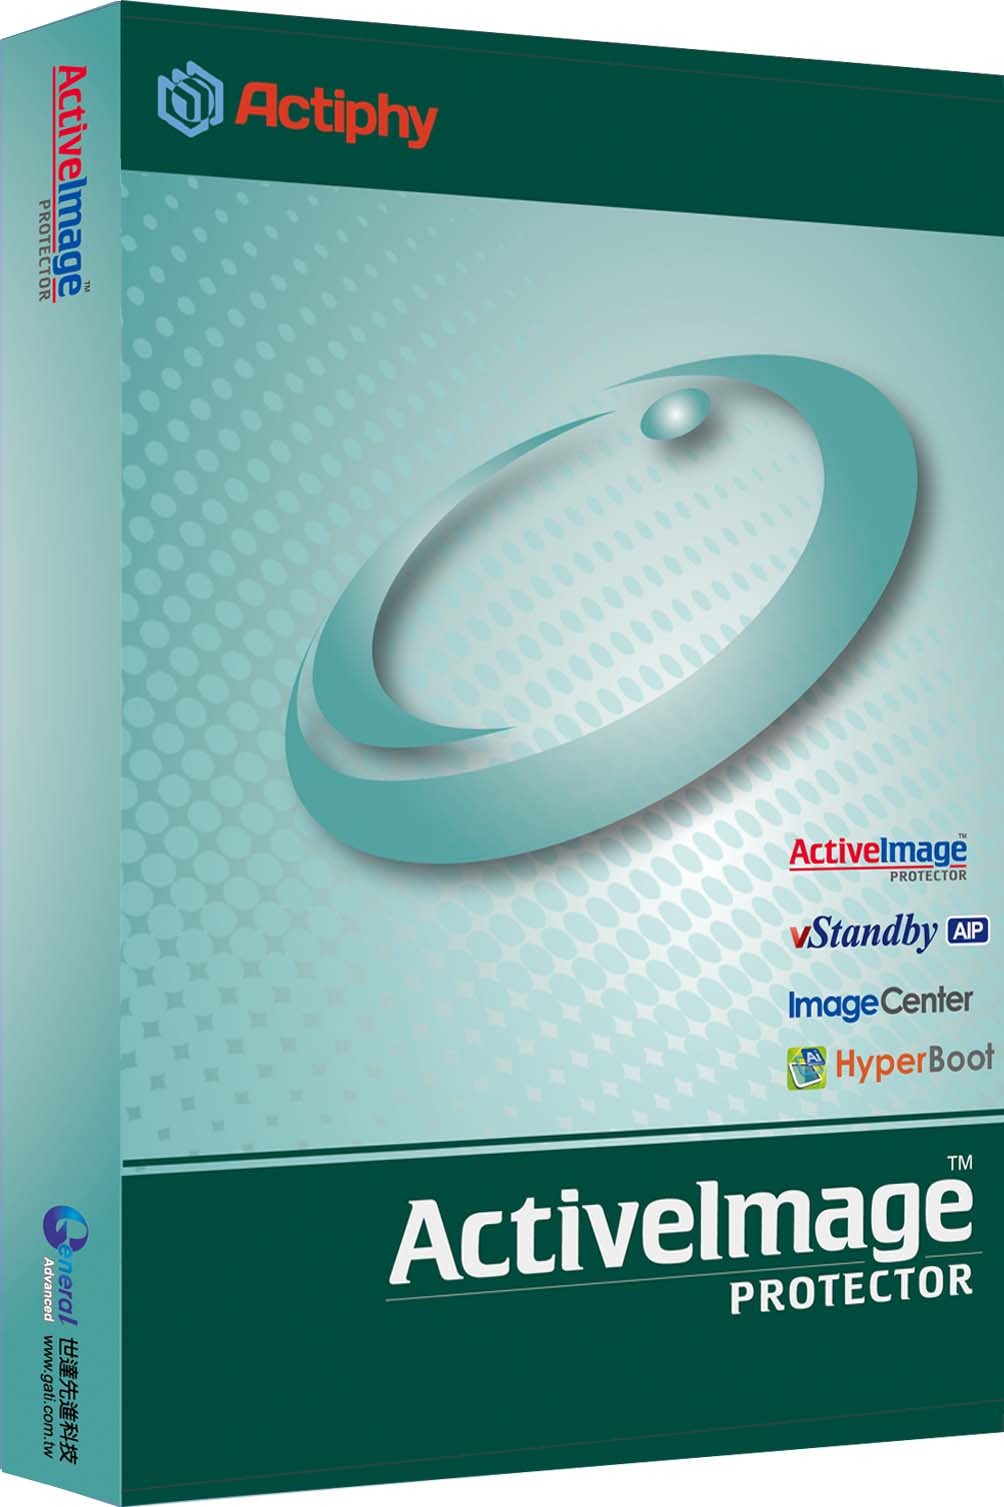 Actiphy ActiveImage Protector 2018 簡易操作手冊